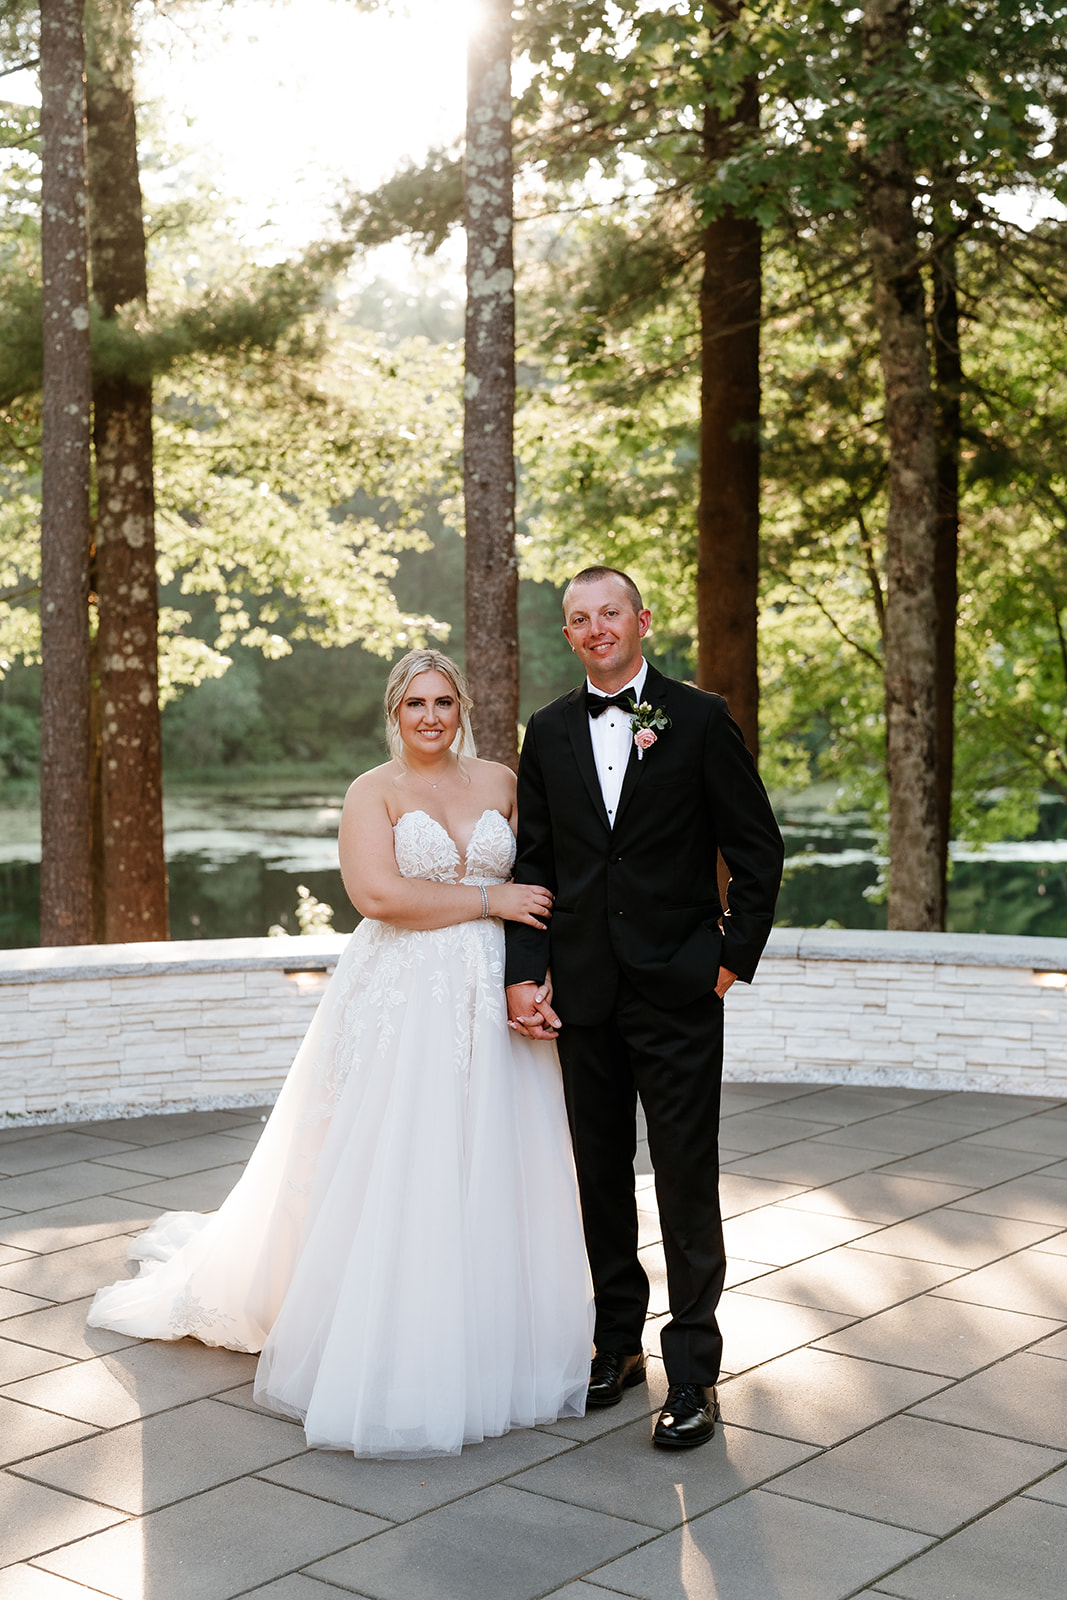 A bride in a white strapless gown and a groom in a black tuxedo with a bow tie are standing together, smiling at the camera, in an outdoor setting with trees and a water feature.